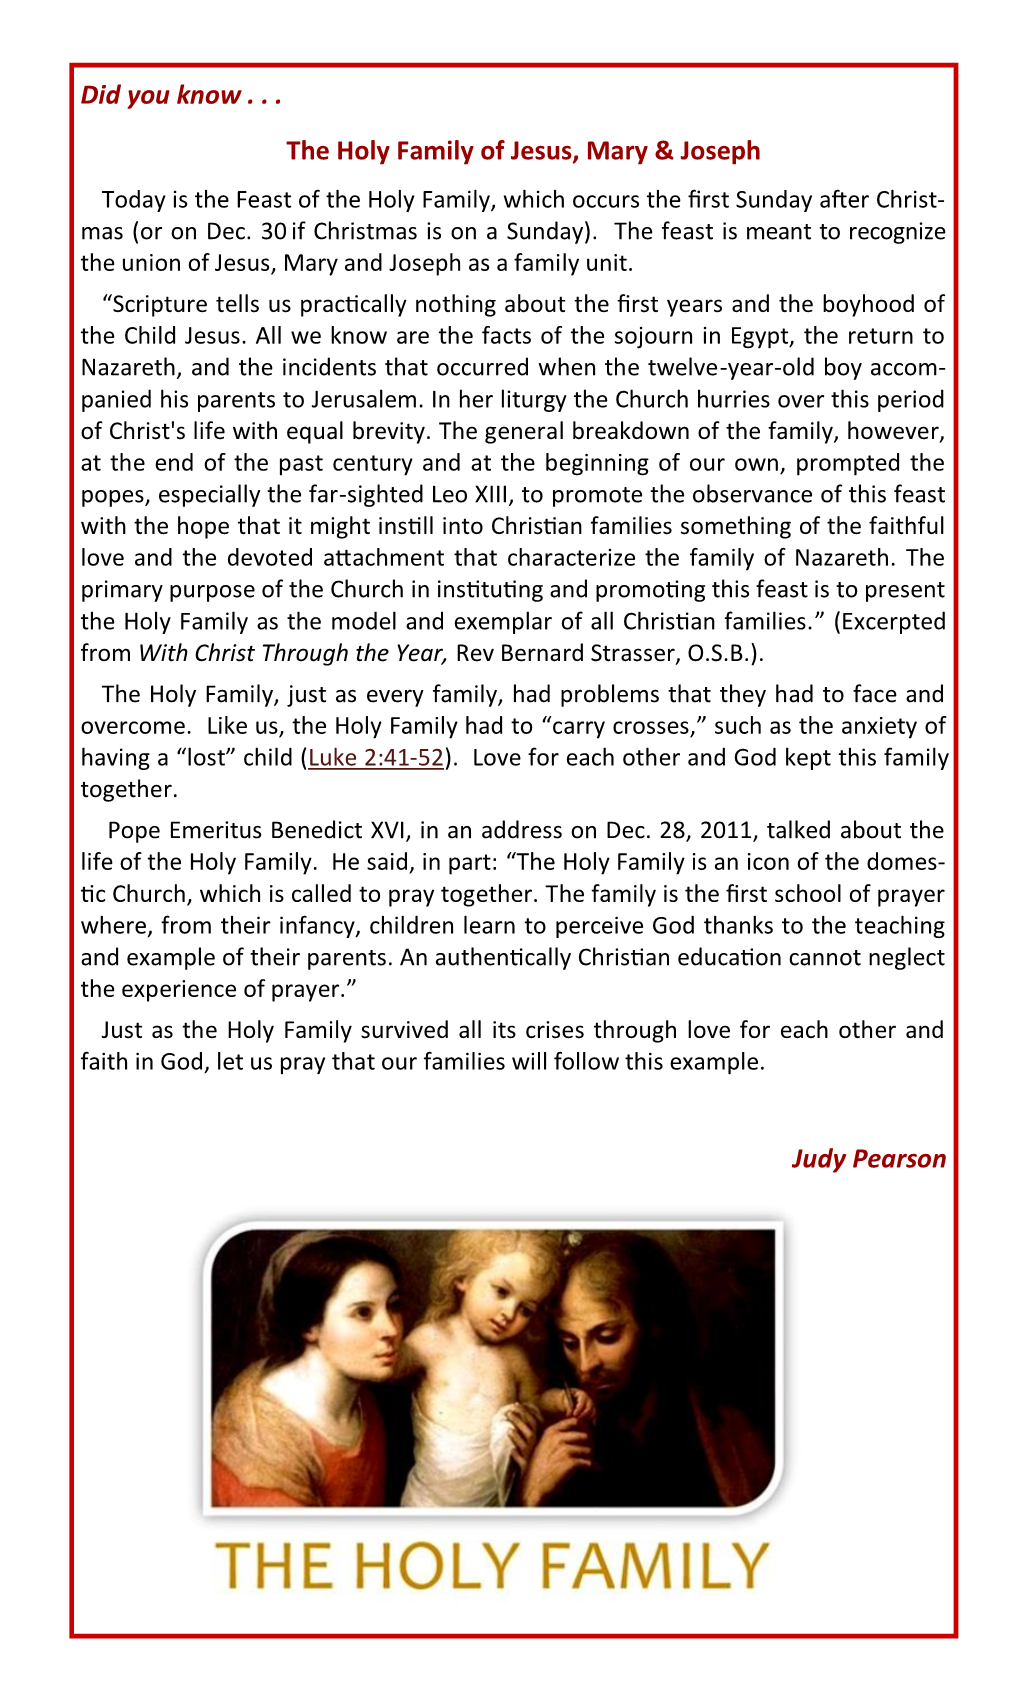 did-you-know-the-holy-family-of-jesus-mary-joseph-judy-pearson-docslib